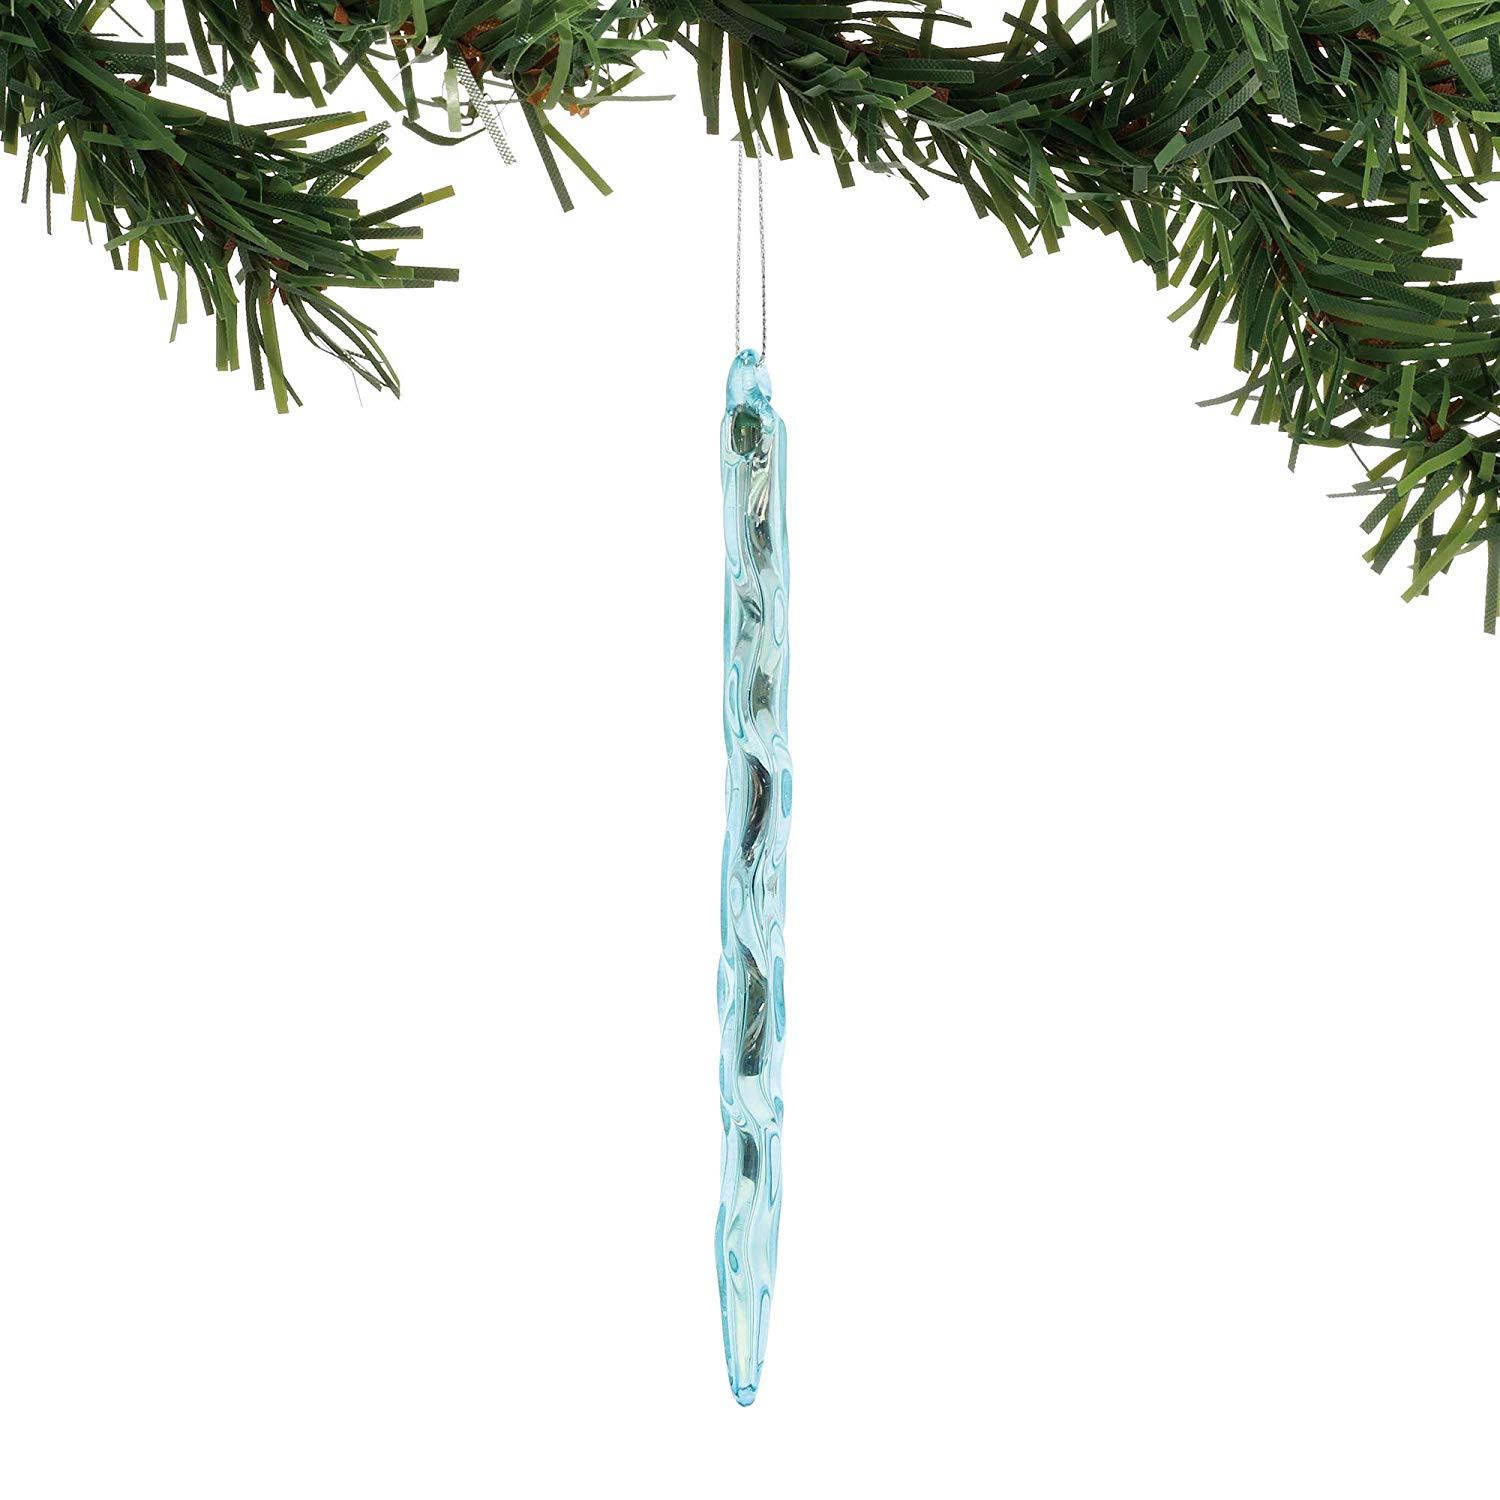 Department 56 Snowbabies Icicle Glass Christmas Tree Ornament 6001993 New | Department 56 | Party Supplies | 30 Day Money Back Guarantee